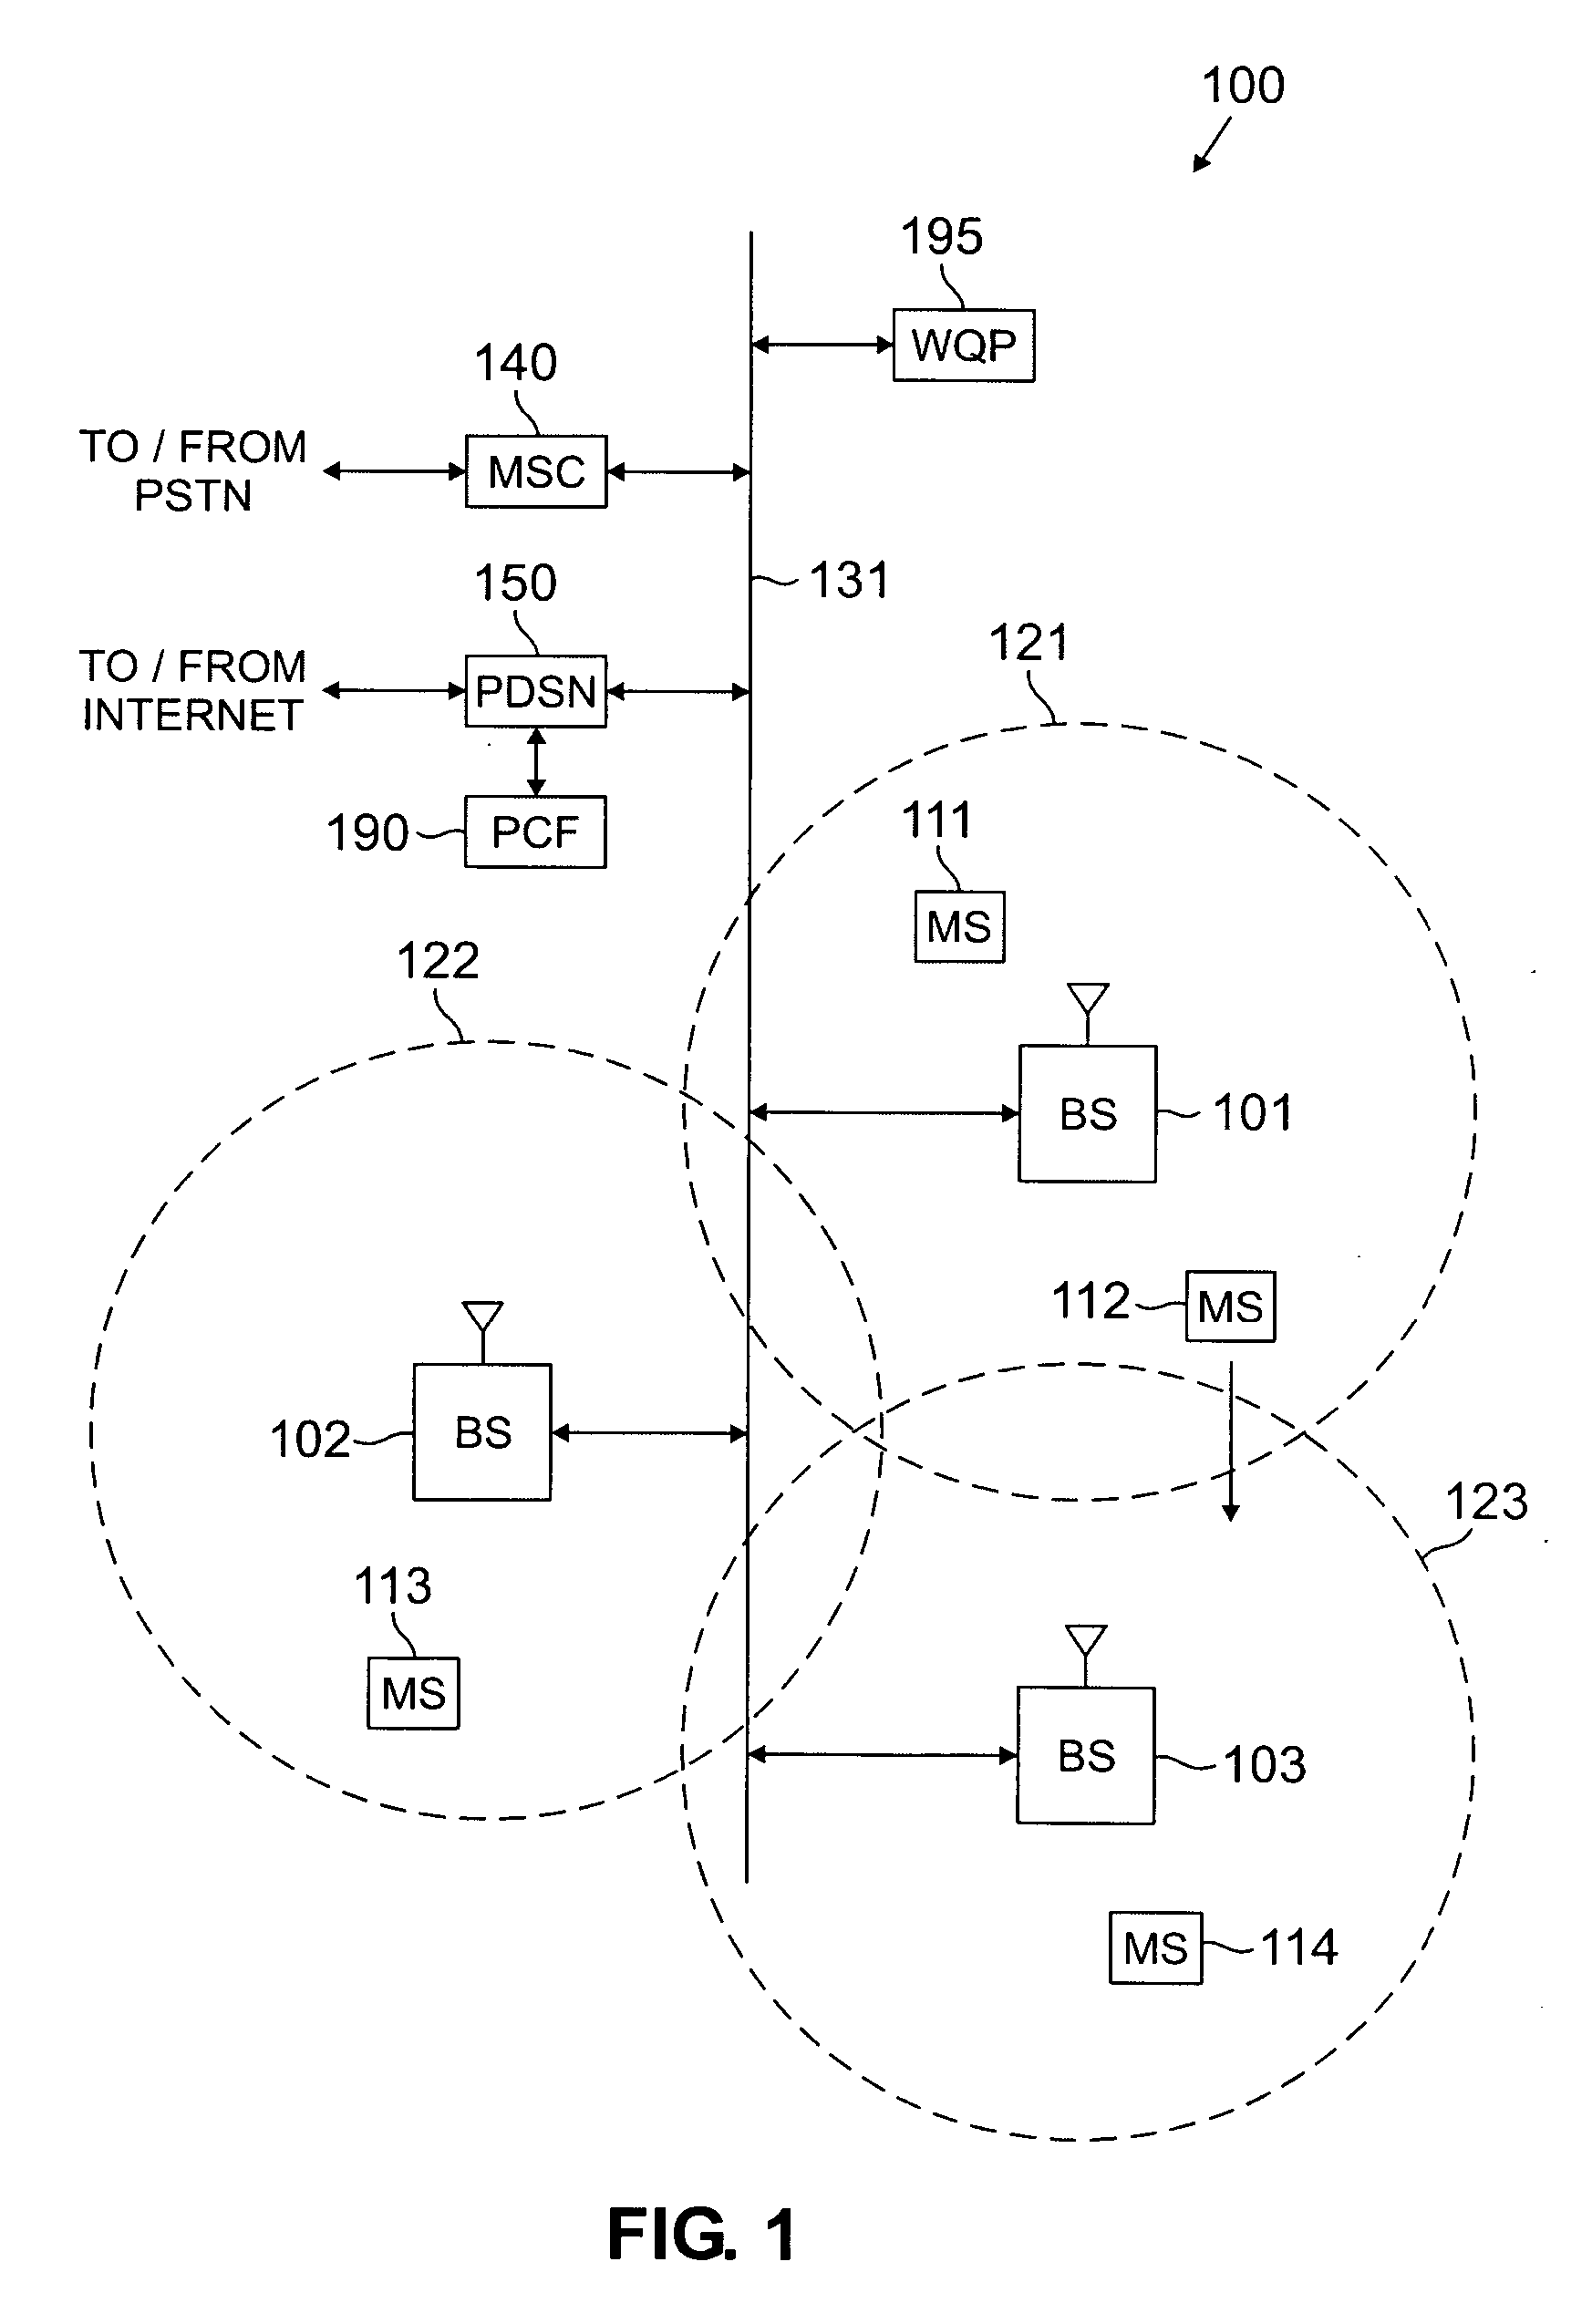 Method and system for providing cross-layer quality-of-service functionality in a wireless network